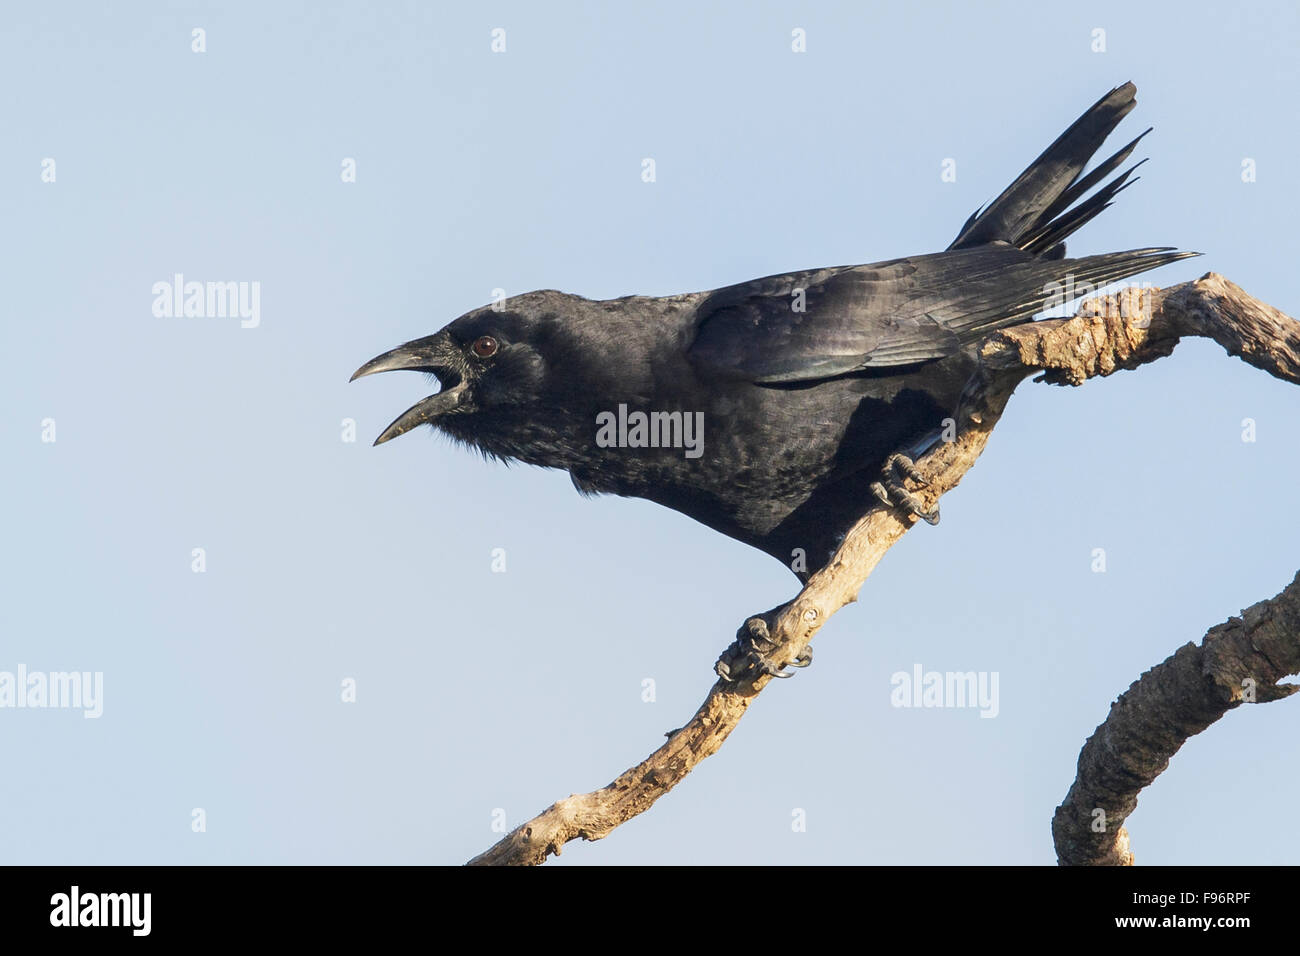 Cuban Palm Crow (Corvus minutus) perched on a branch in Cuba. Stock Photo